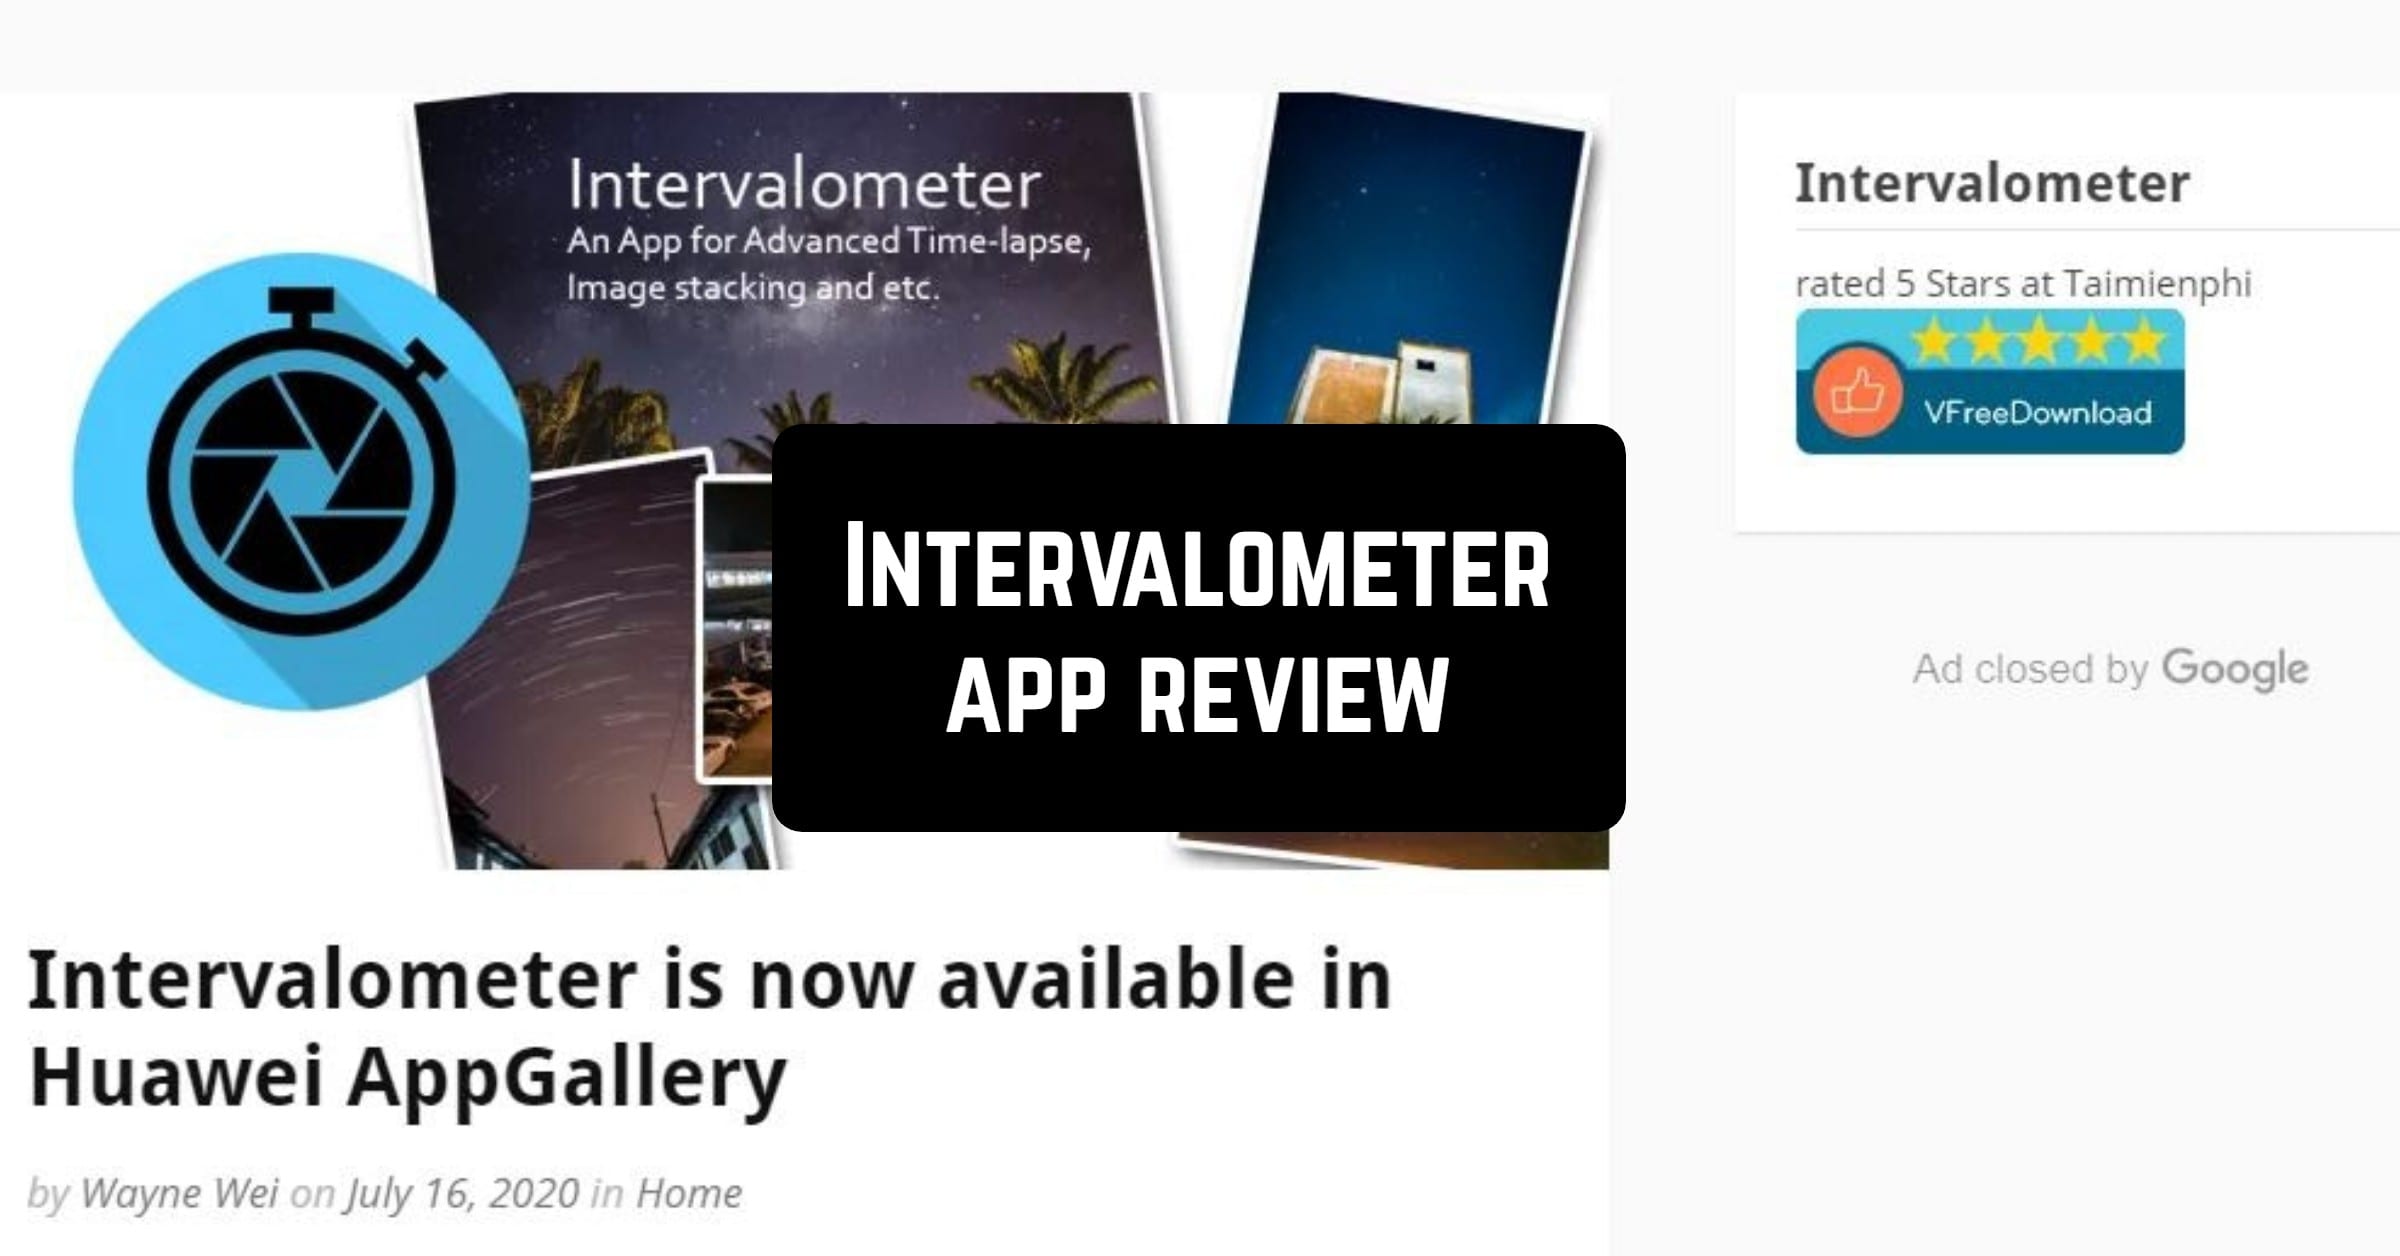 Intervalometer App Review - App pearl - Best mobile apps for Android & iOS devices